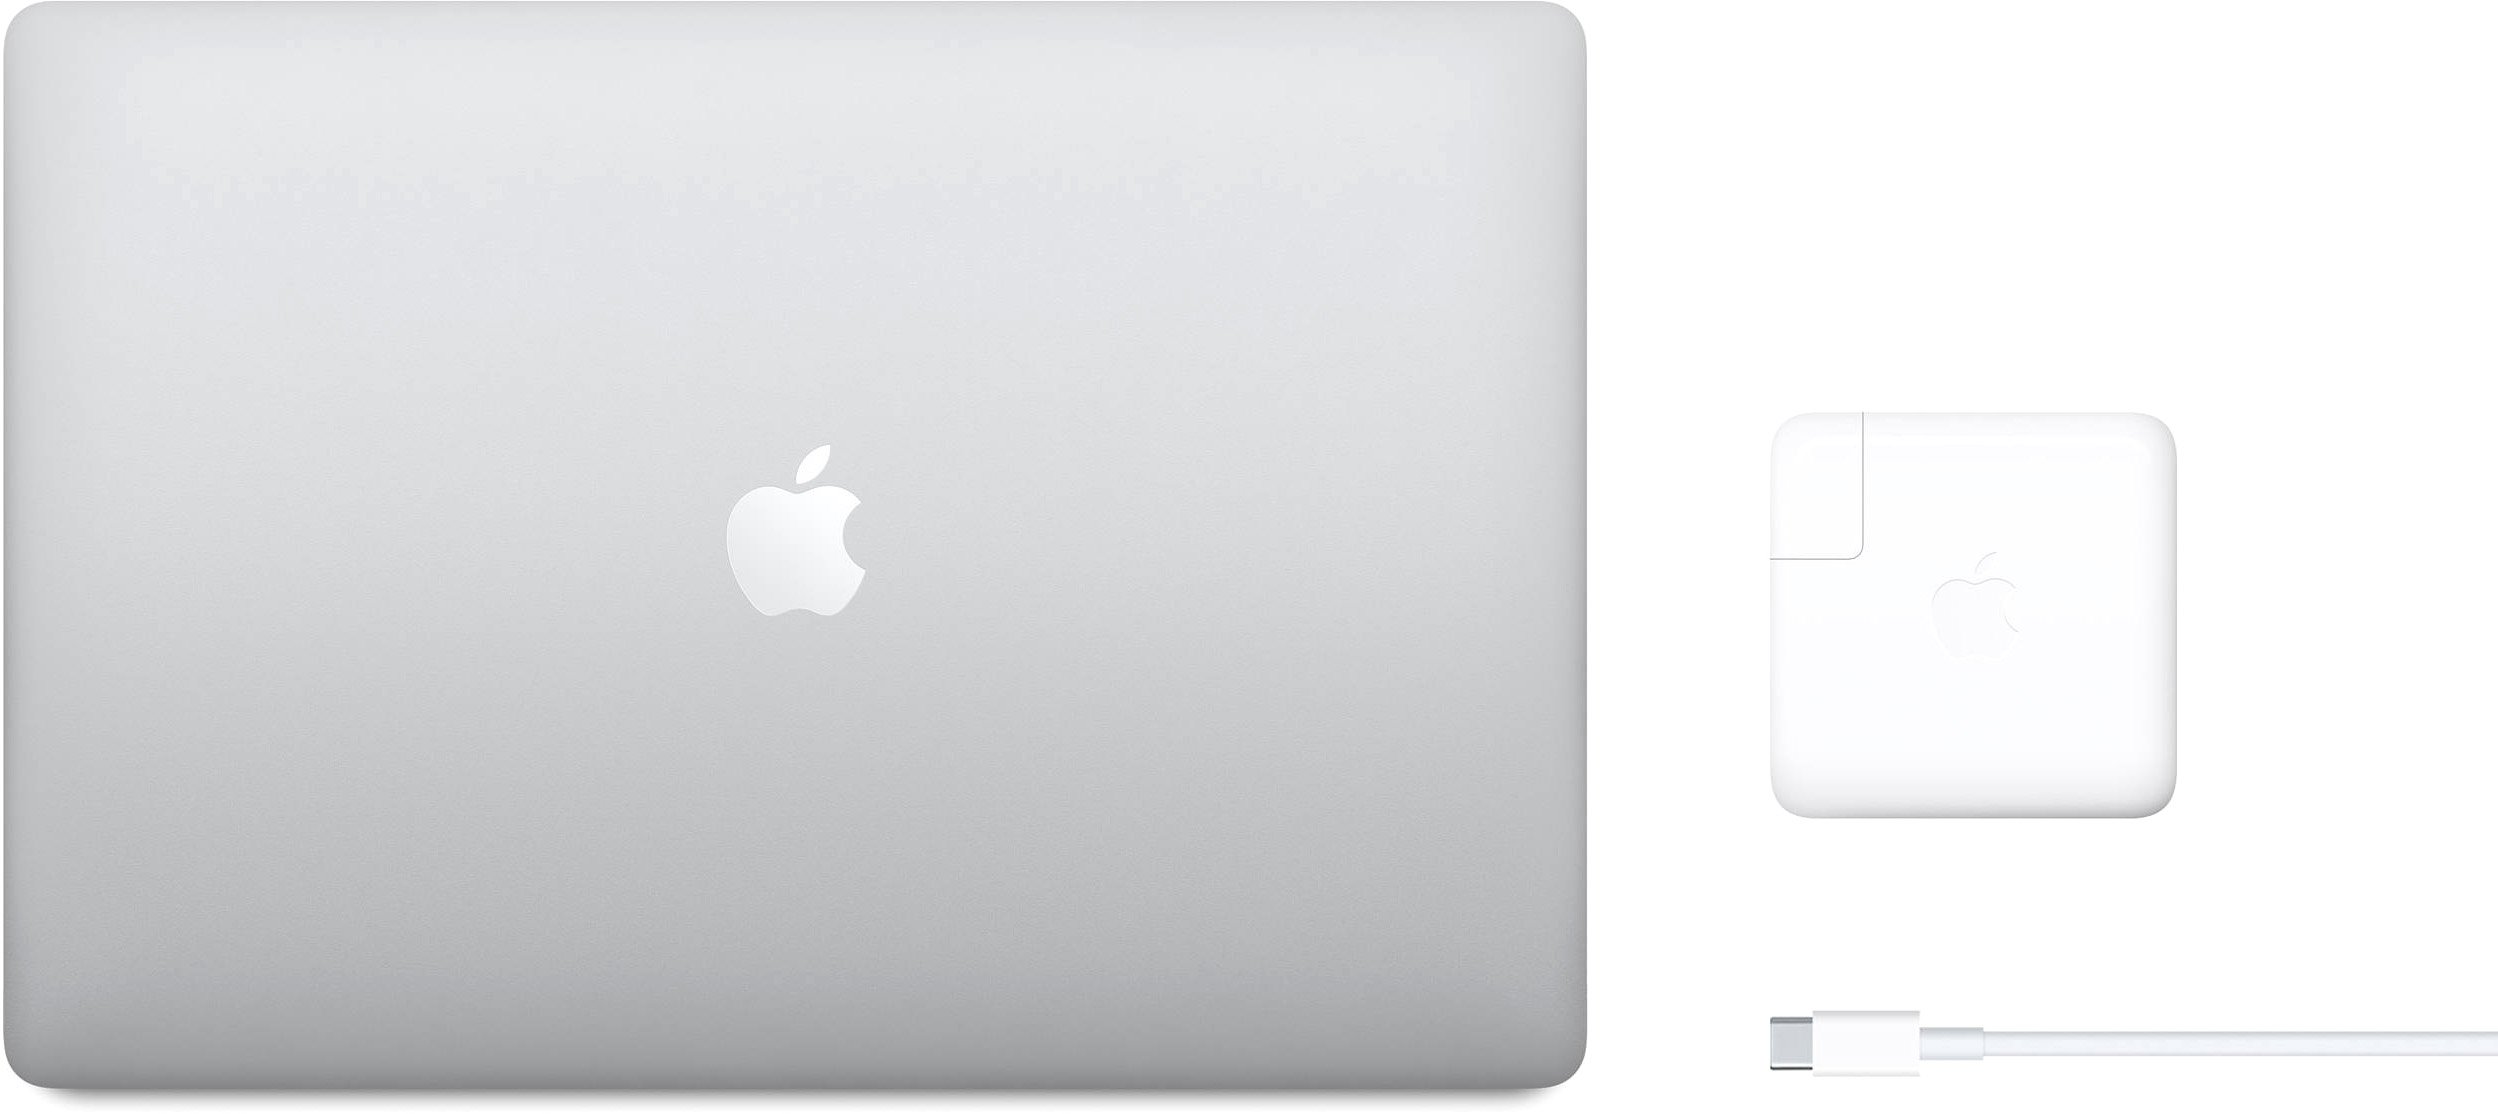 pros and cons of new macbook pro with retina display